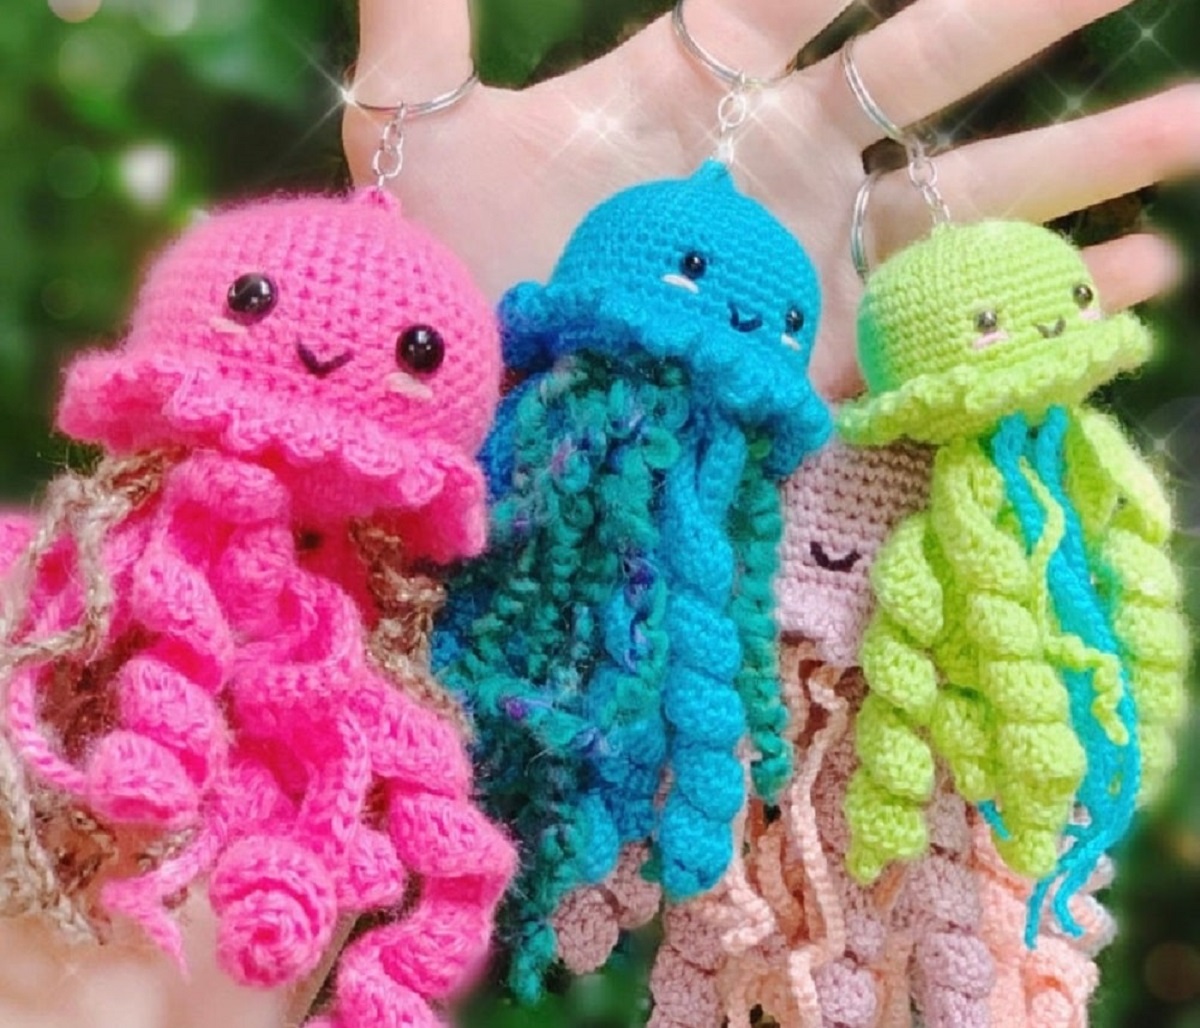 A hand holding three crochet jellyfish keychains in pink, blue, and yellow, with curled tentacles hanging from them.